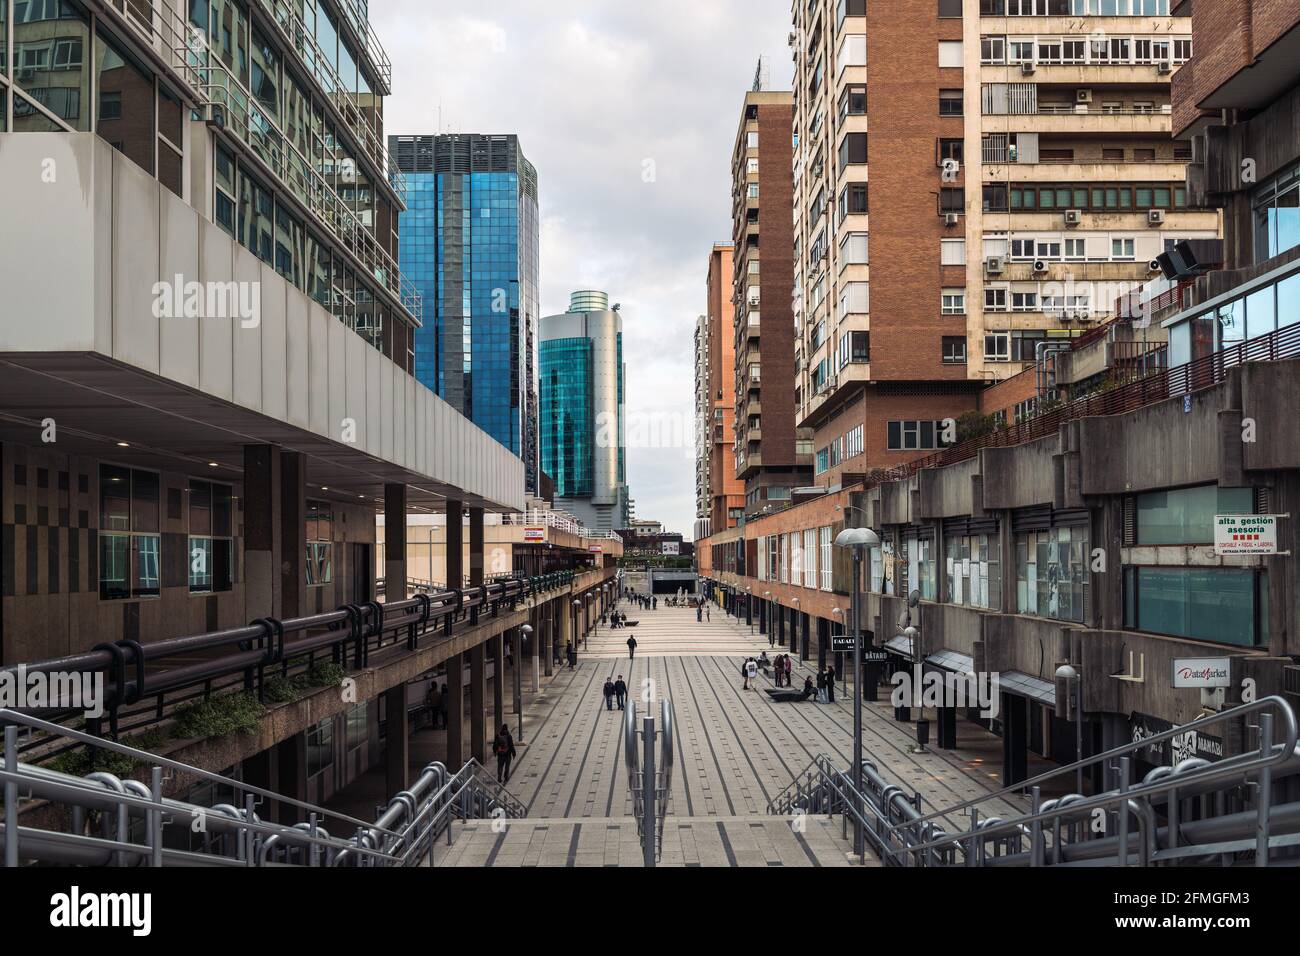 MADRID - MAY 1, 2021: Wide-angle view of the alleys and modern buildings in the AZCA business and financial district in Madrid, Spain. Stock Photo